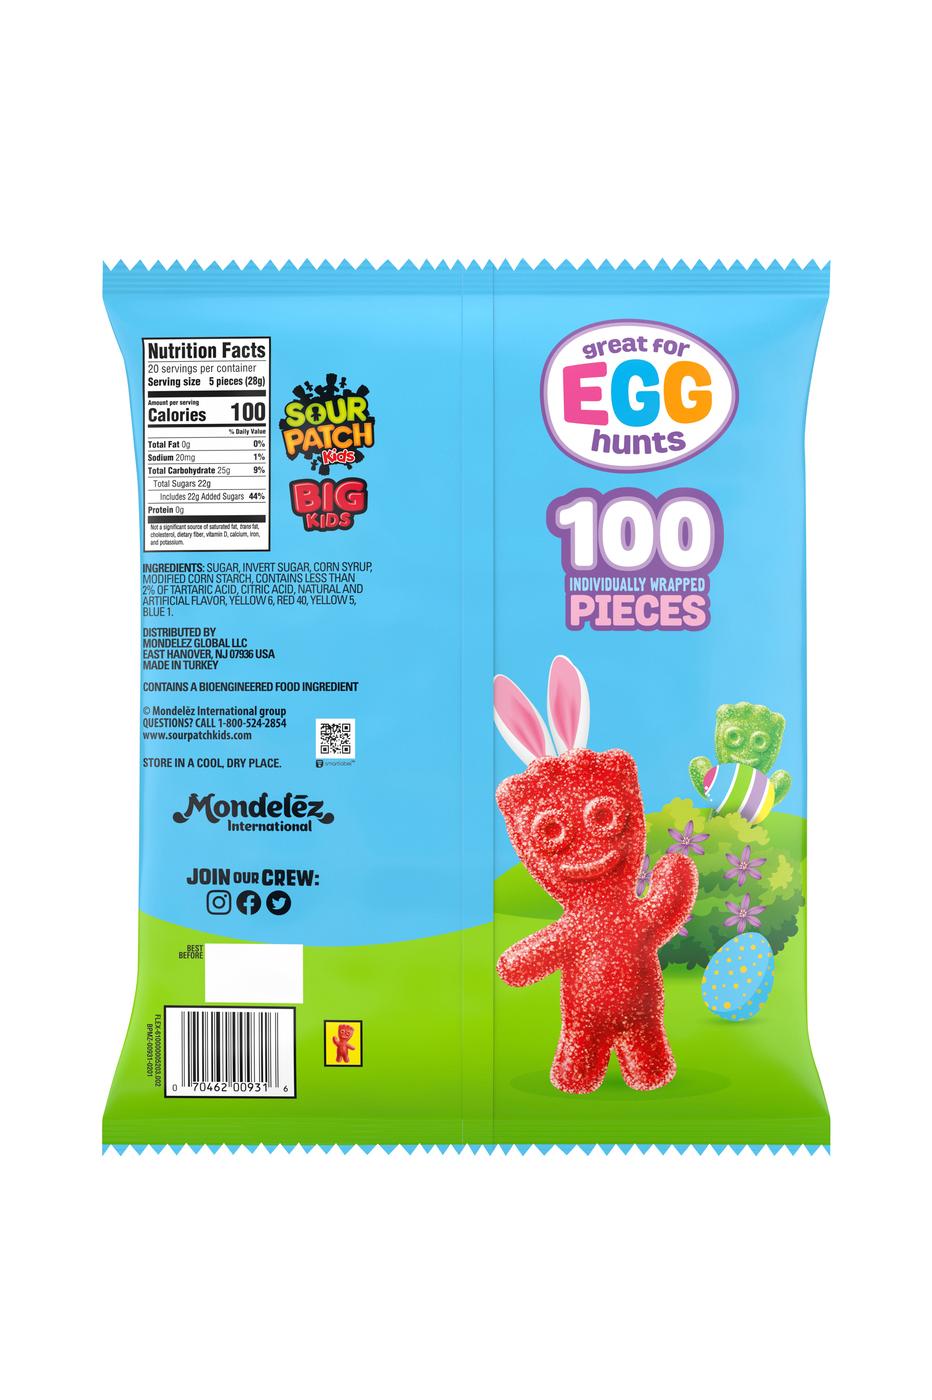 Sour Patch Kids Soft & Chewy Candy - Family Size - Shop Candy at H-E-B